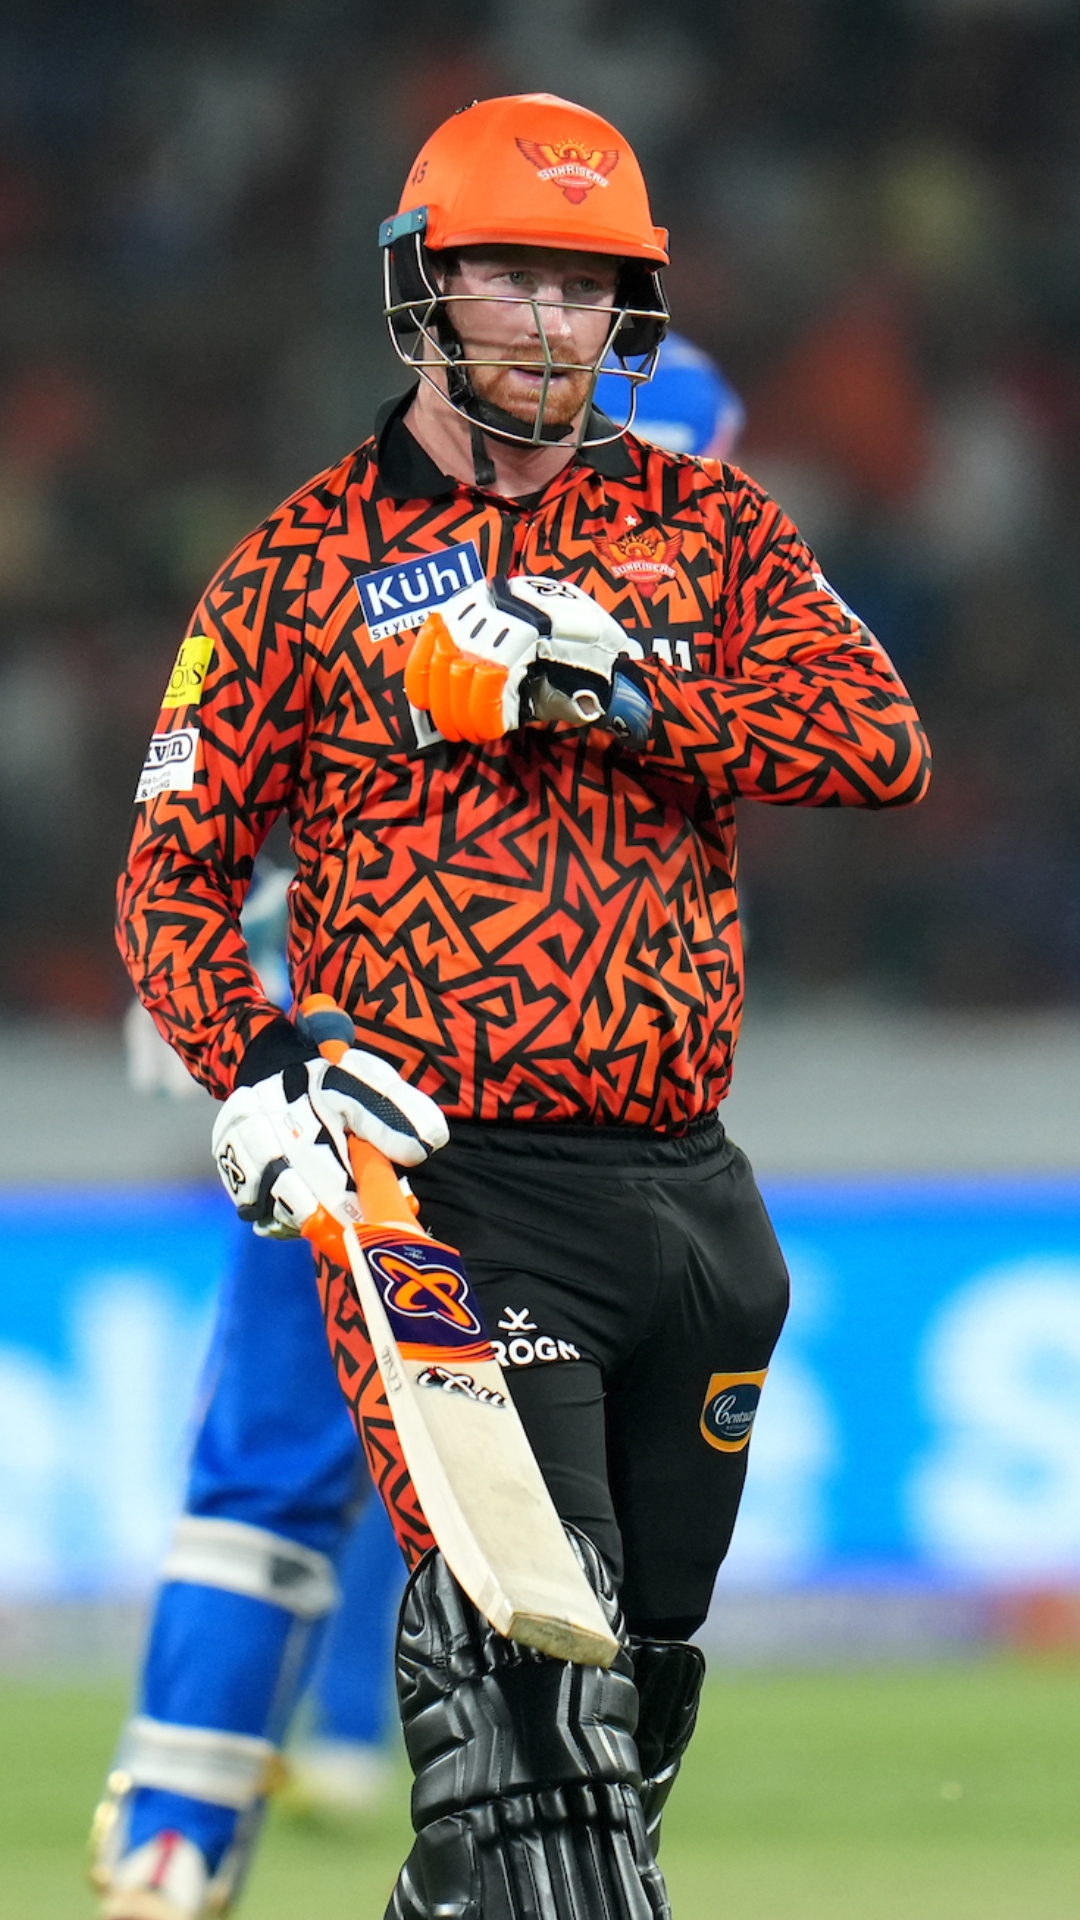 Highest totals in IPL as SRH shatter records against MI